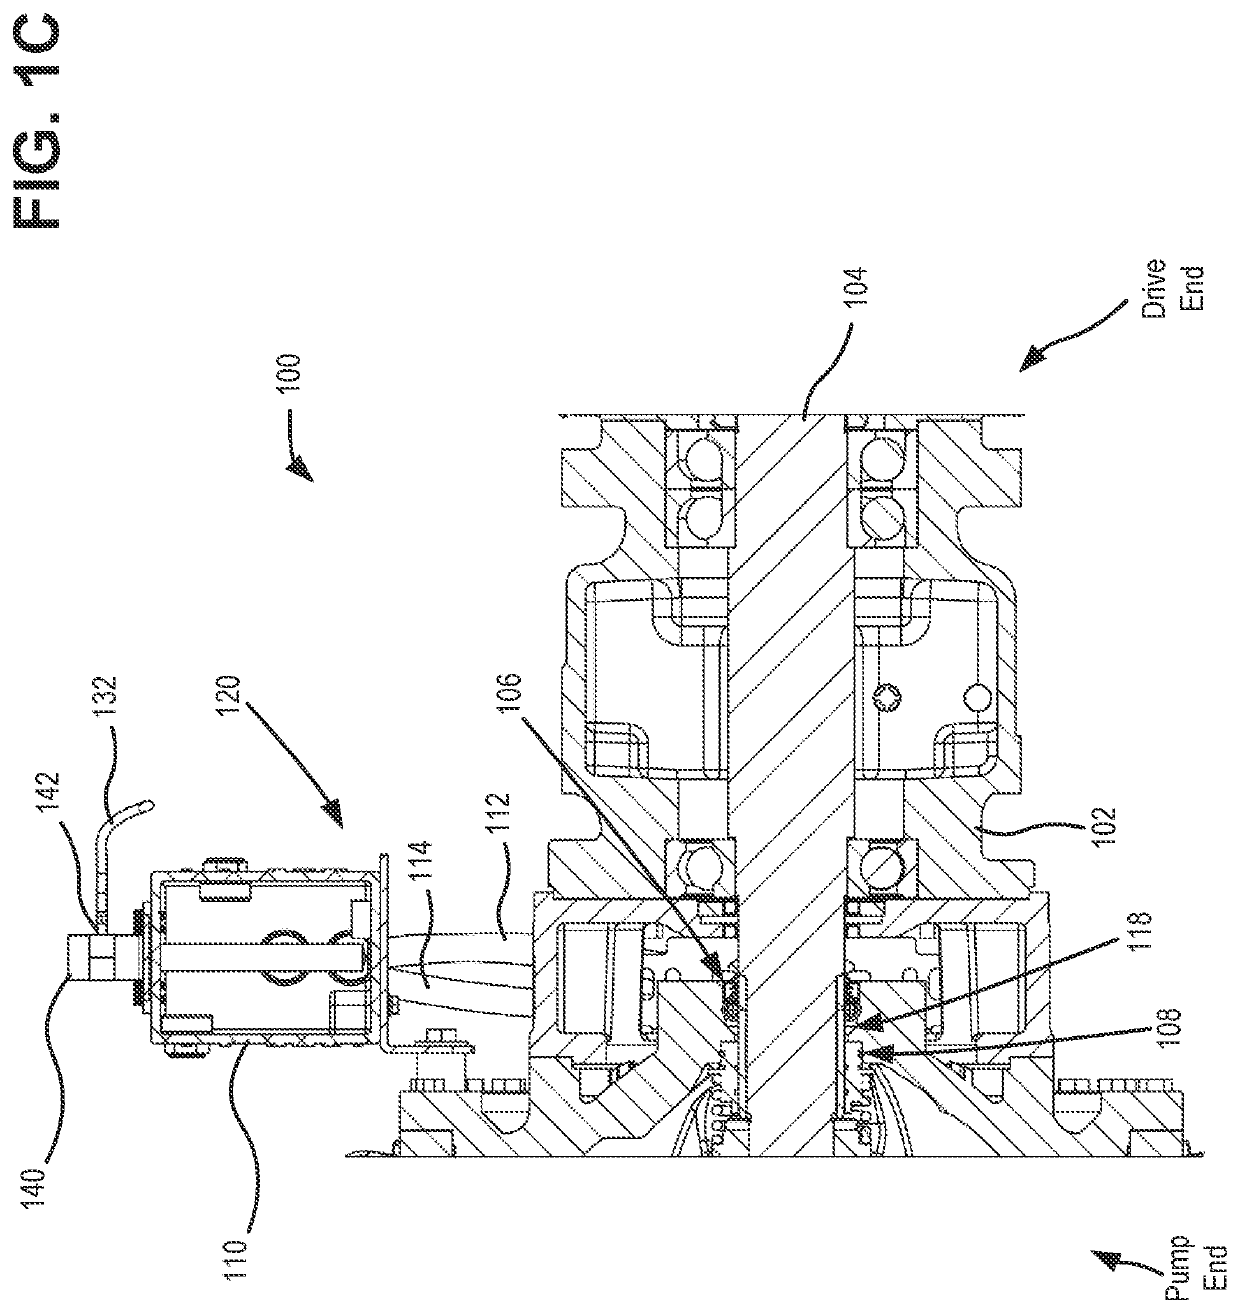 Monitoring system for pump with mechanical seal lubrication arrangement